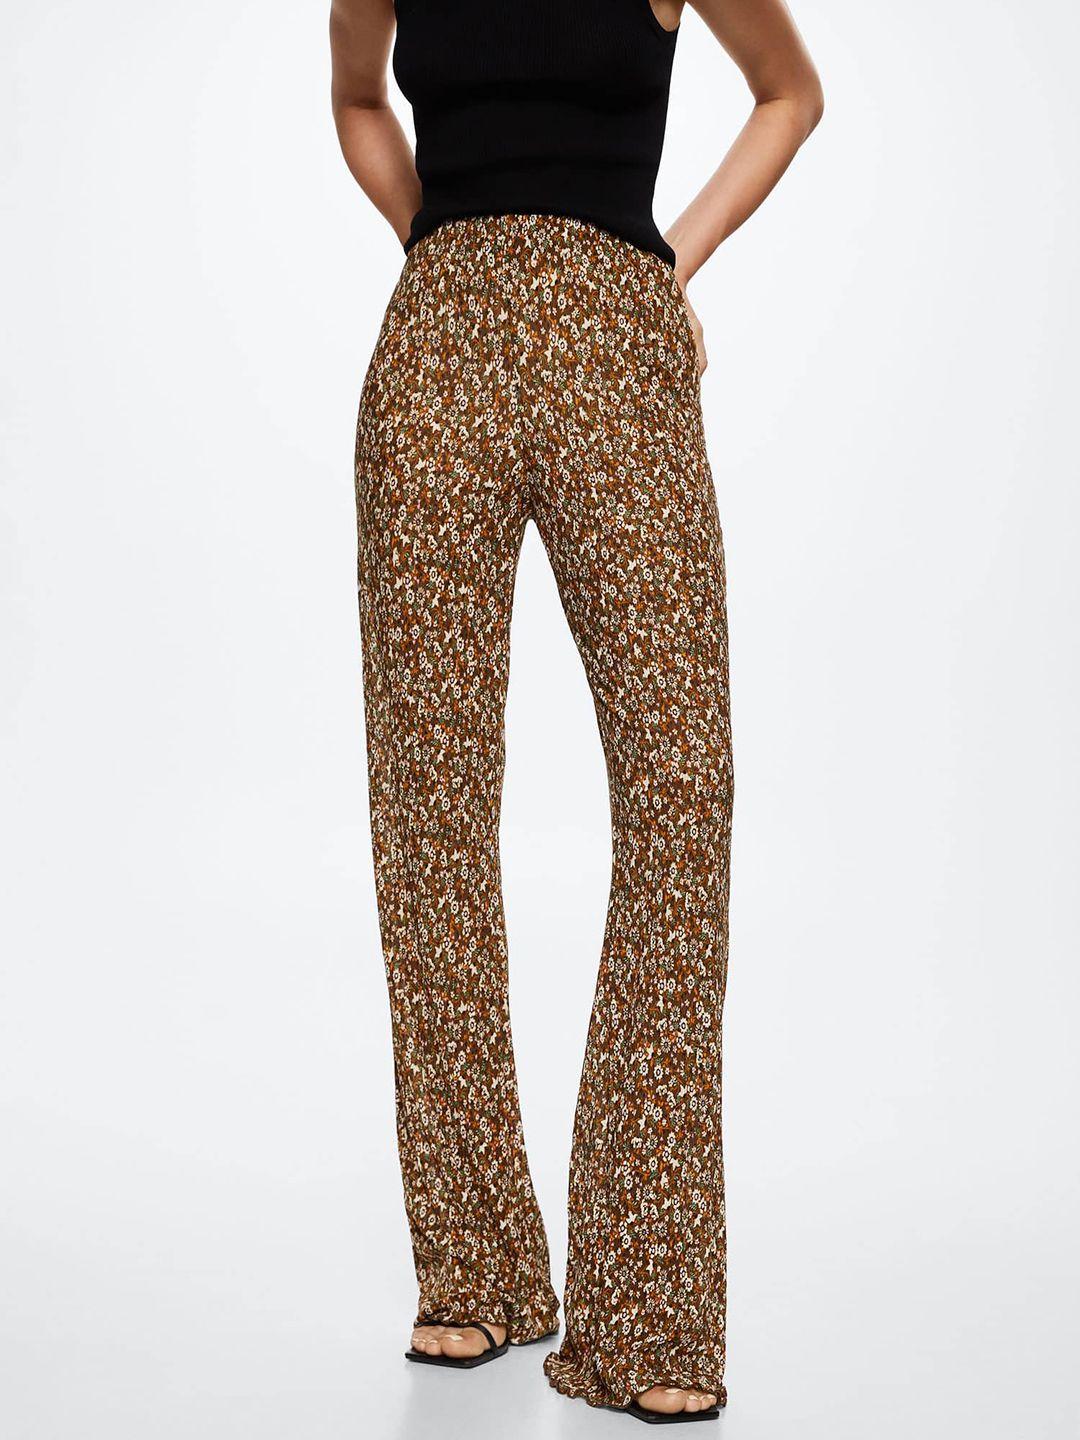 mango-women-brown-floral-printed-sustainable-trousers